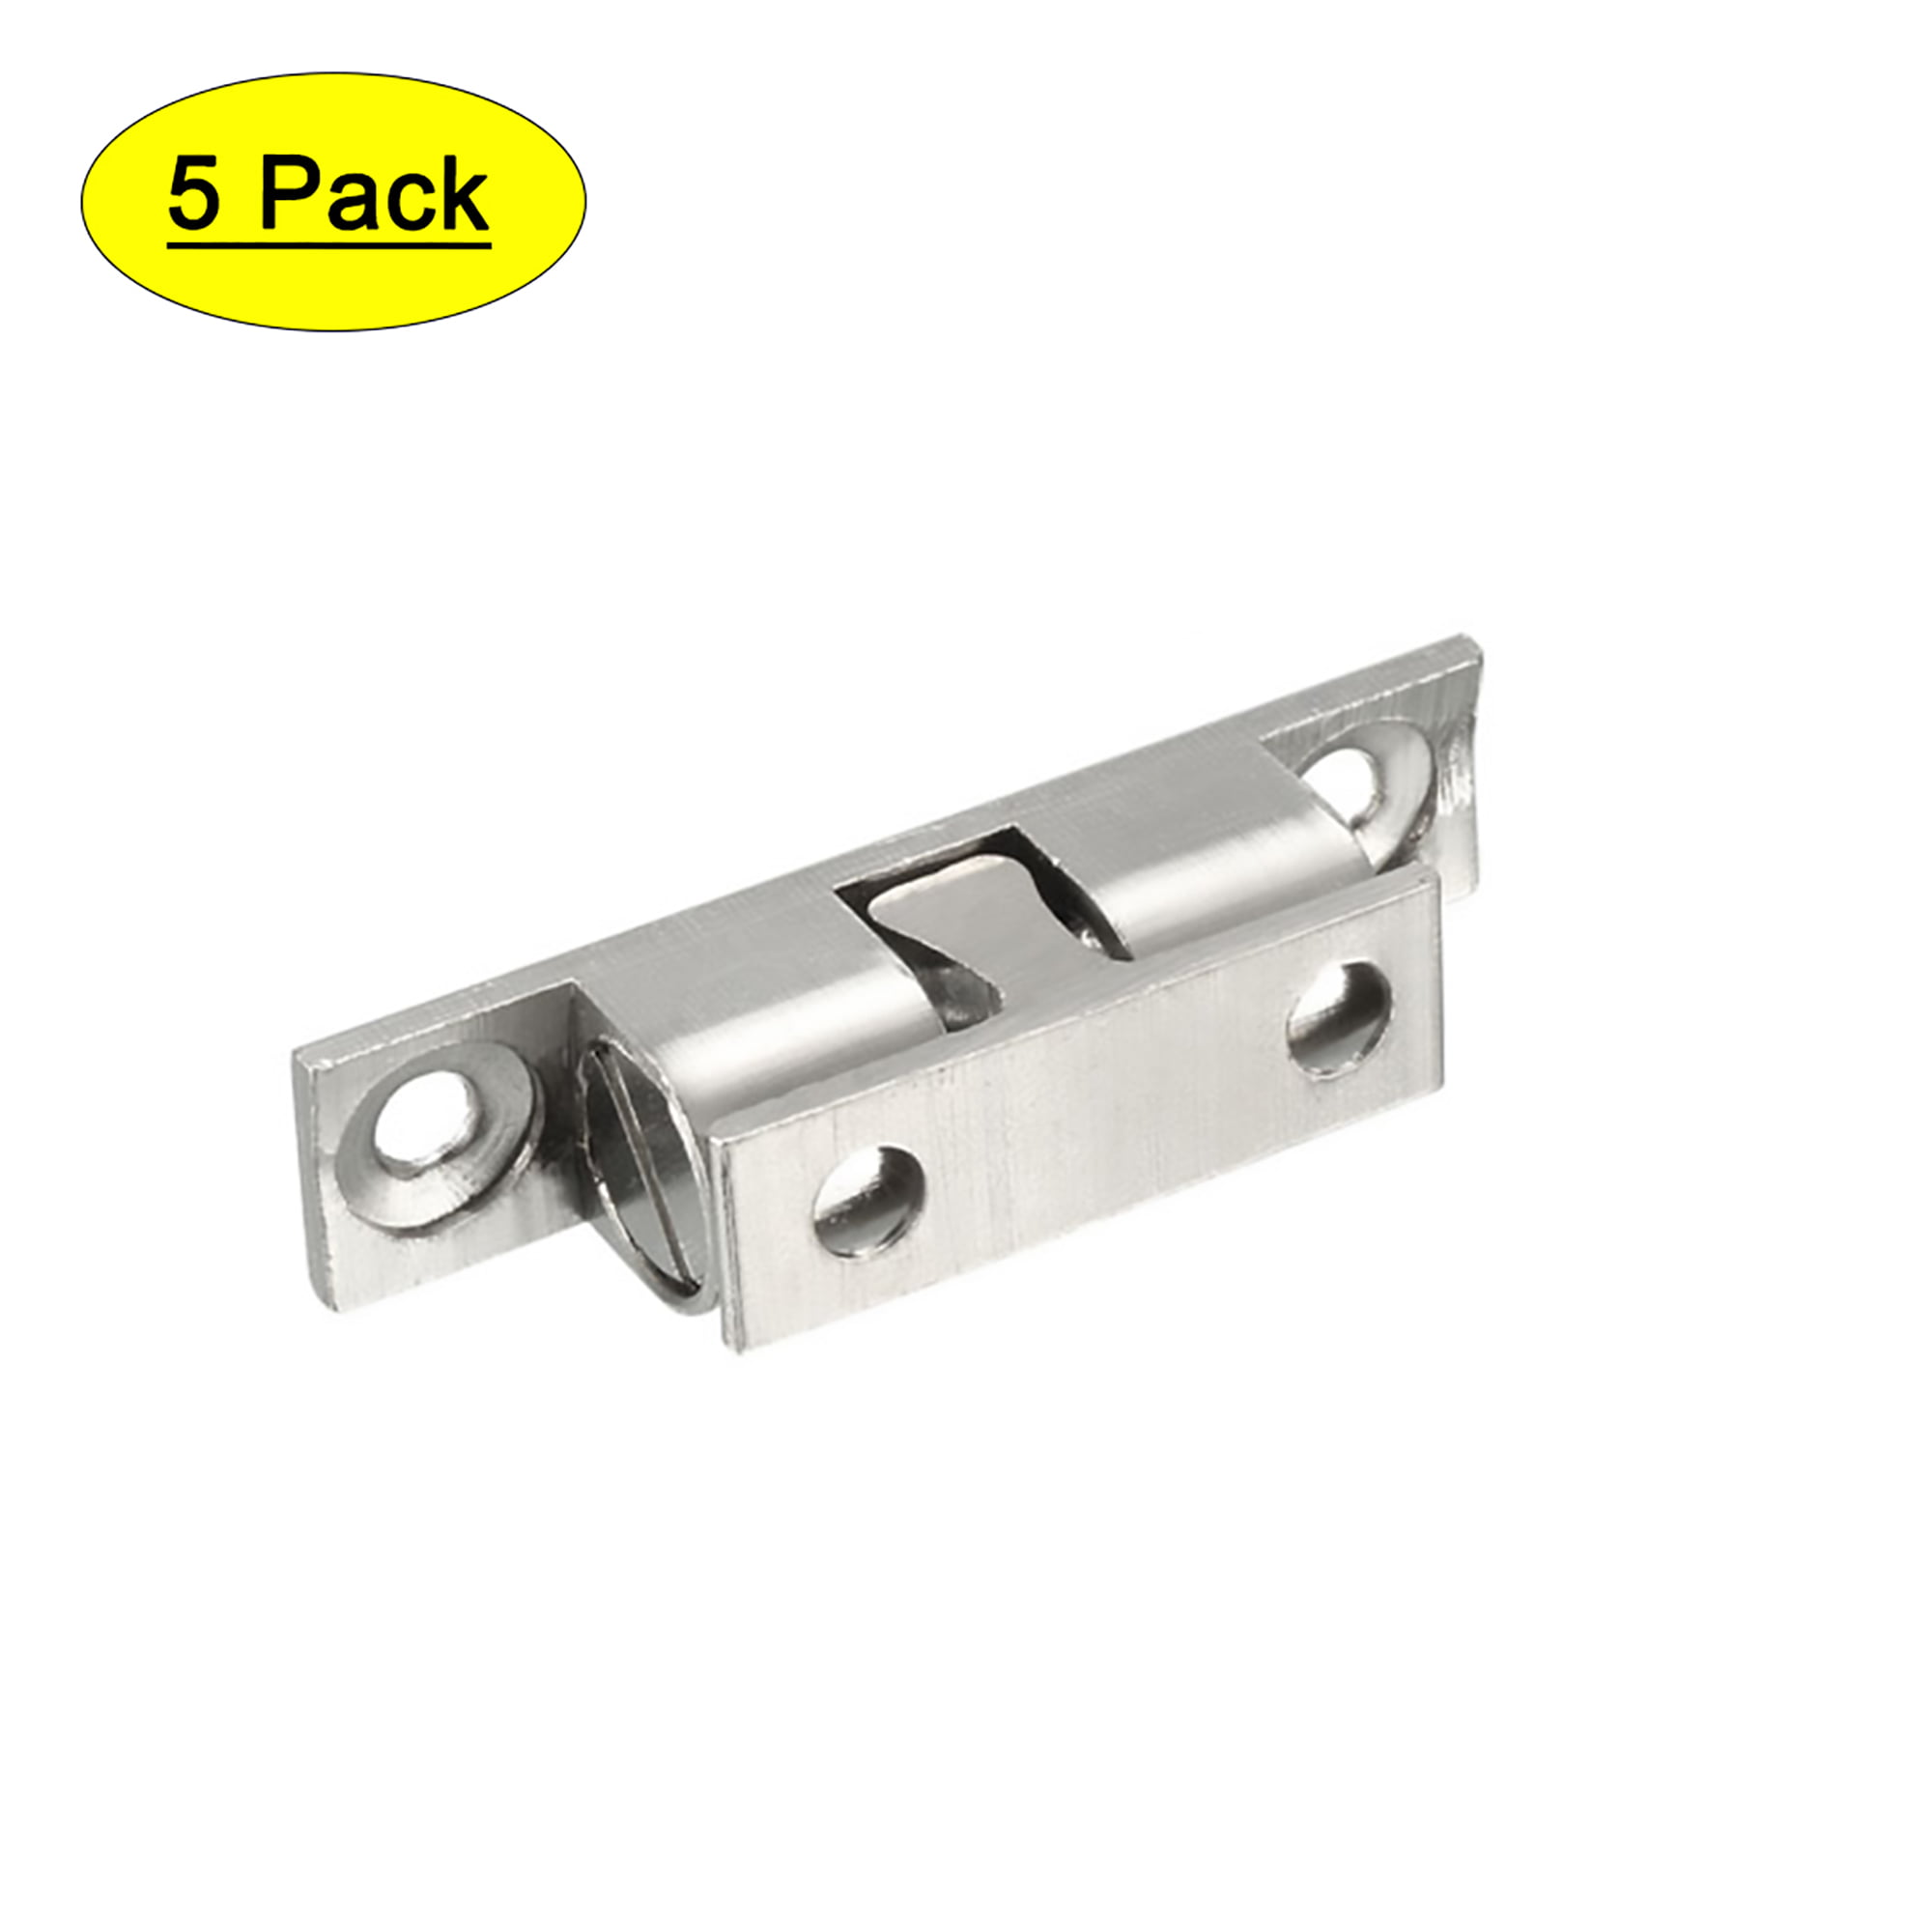 uxcell 2pcs Cabinet Door Closet Brass Double Ball Catch Tension Latch 40mm Length Silver Tone